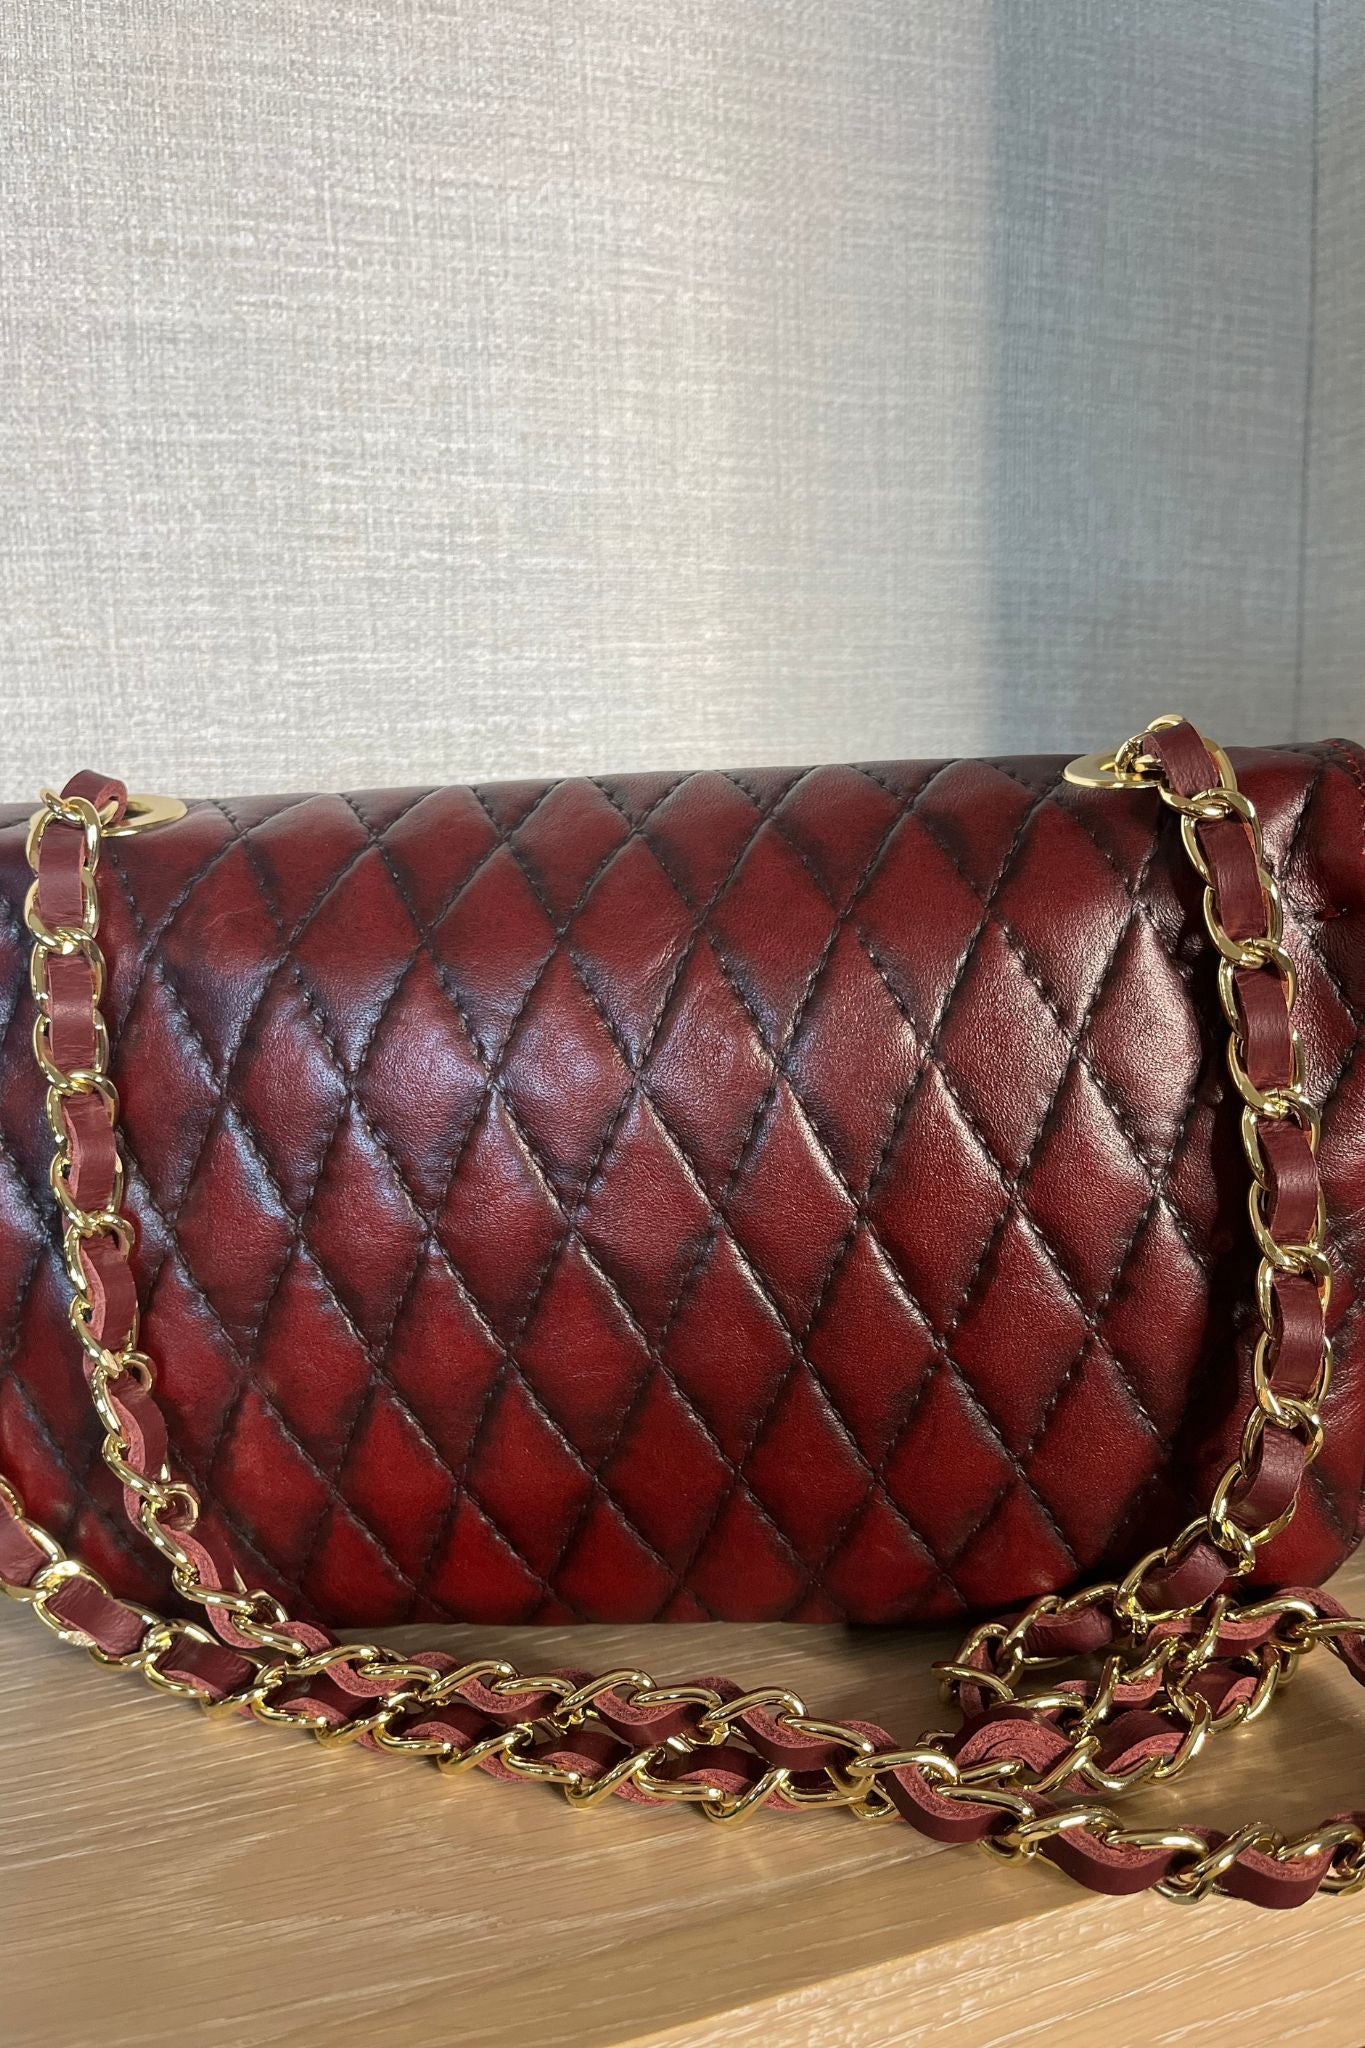 Amber Quilted Bag In Wine Red - The Walk in Wardrobe